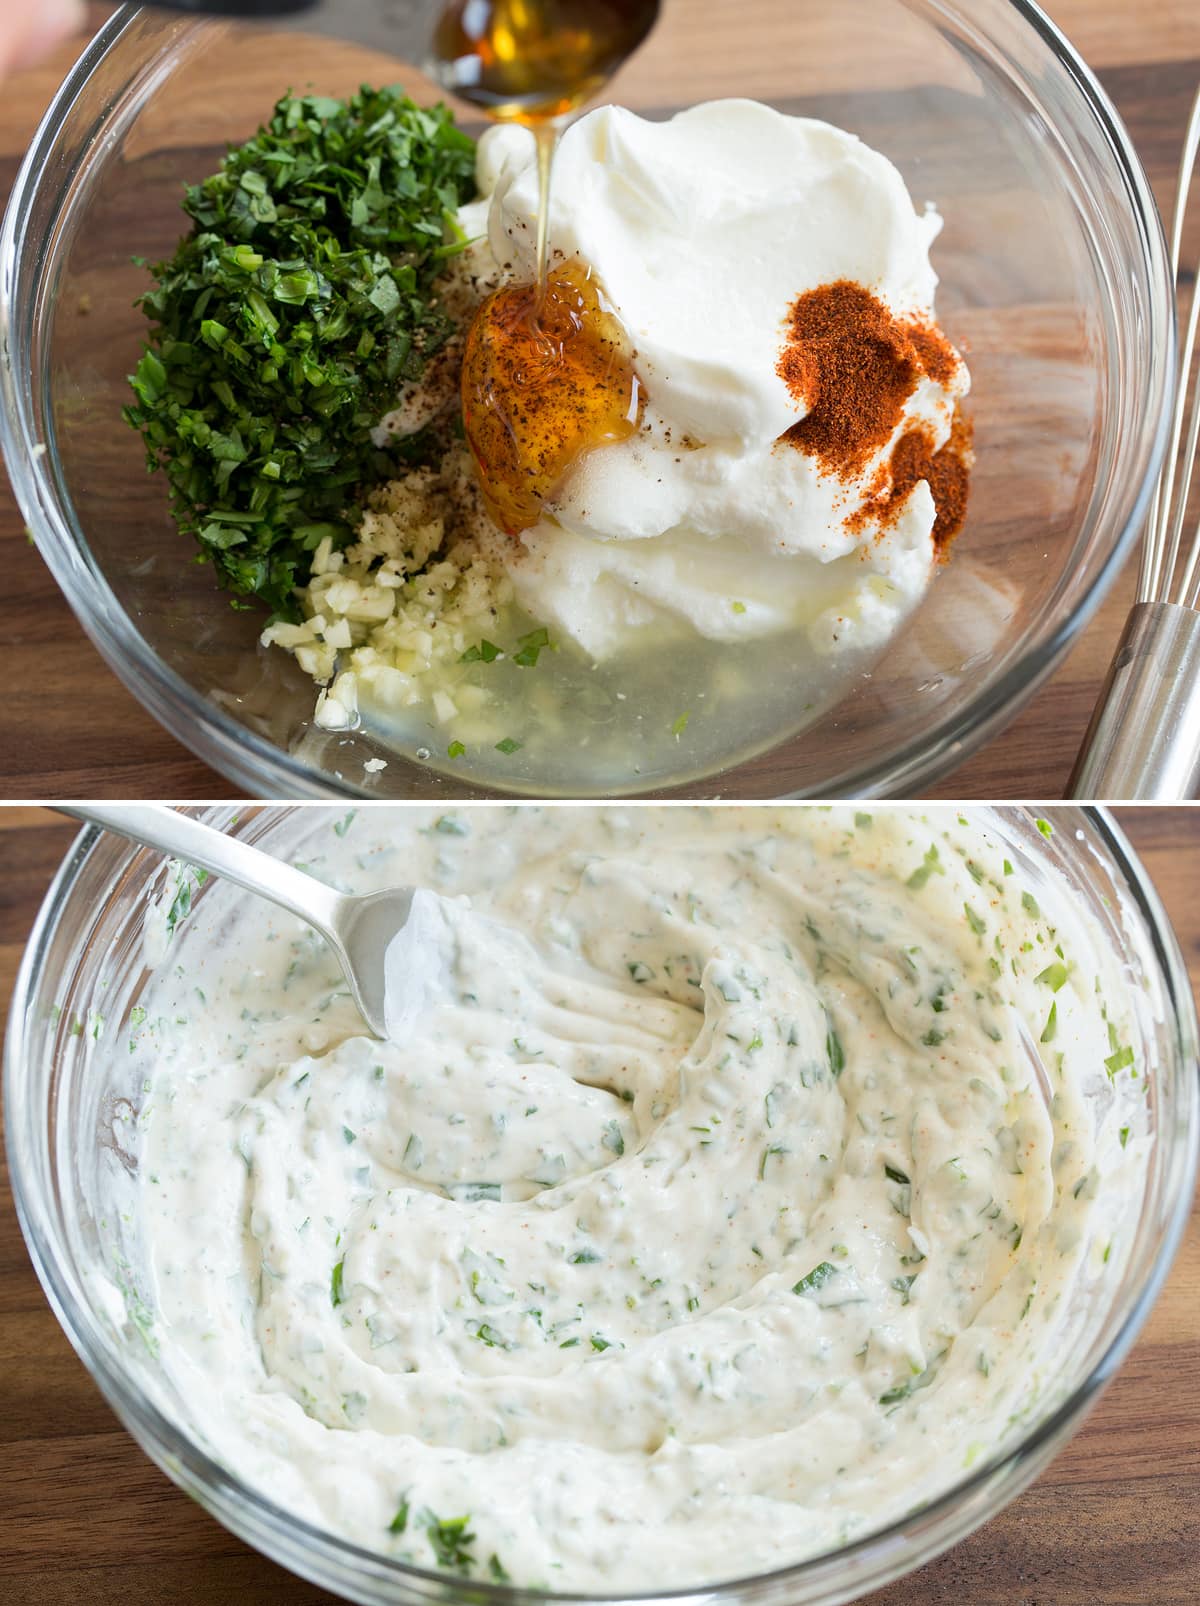 Collage of two images showing creamy cilantro sauce before and after mixing.